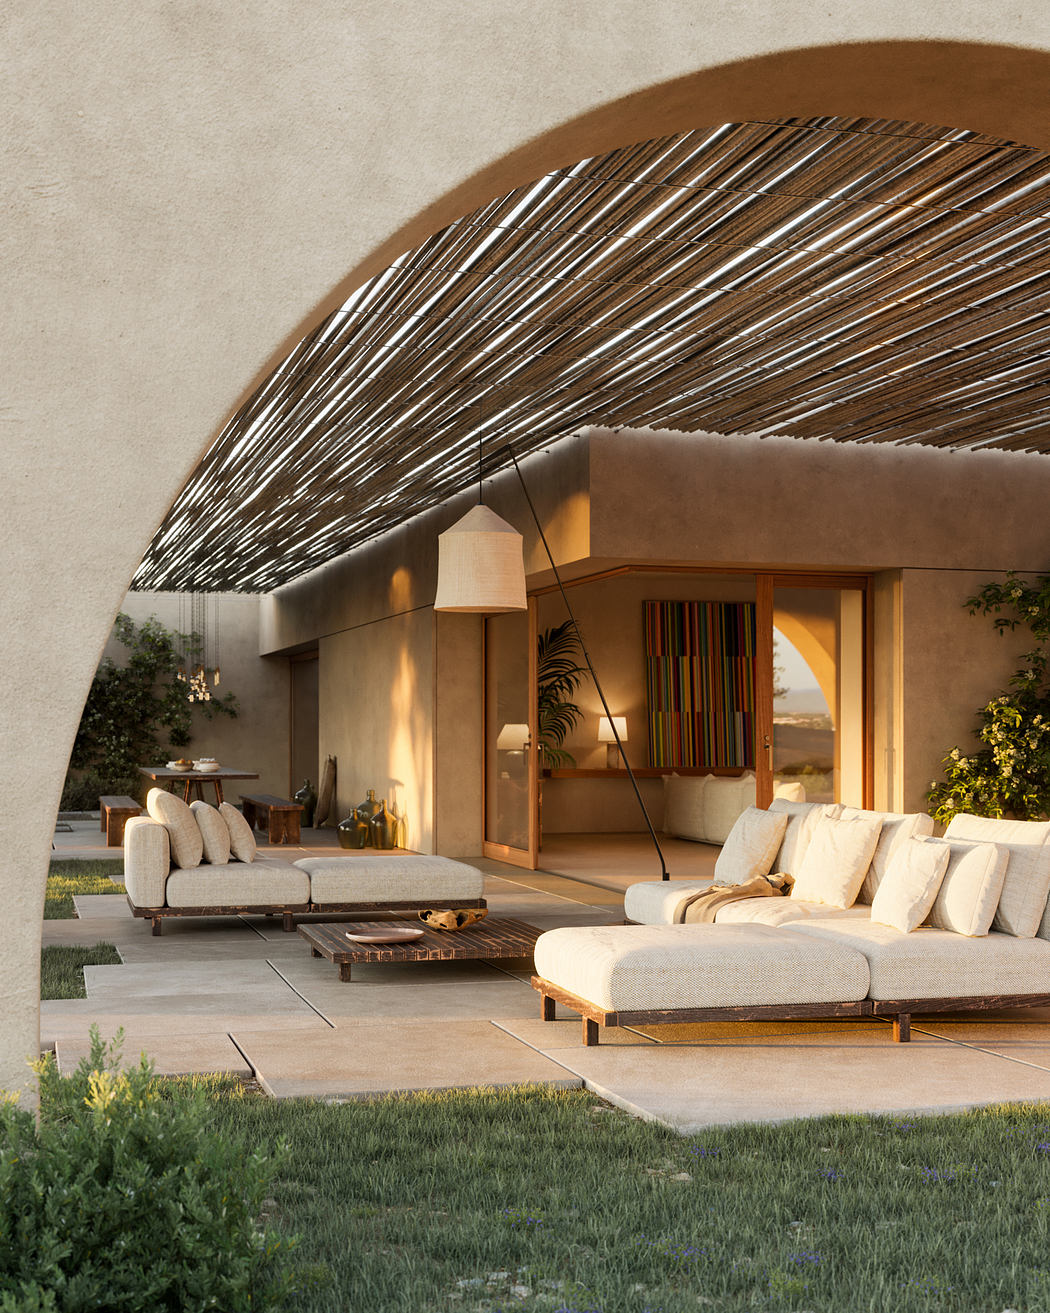 Contemporary outdoor lounge with curved pergola and plush seating.